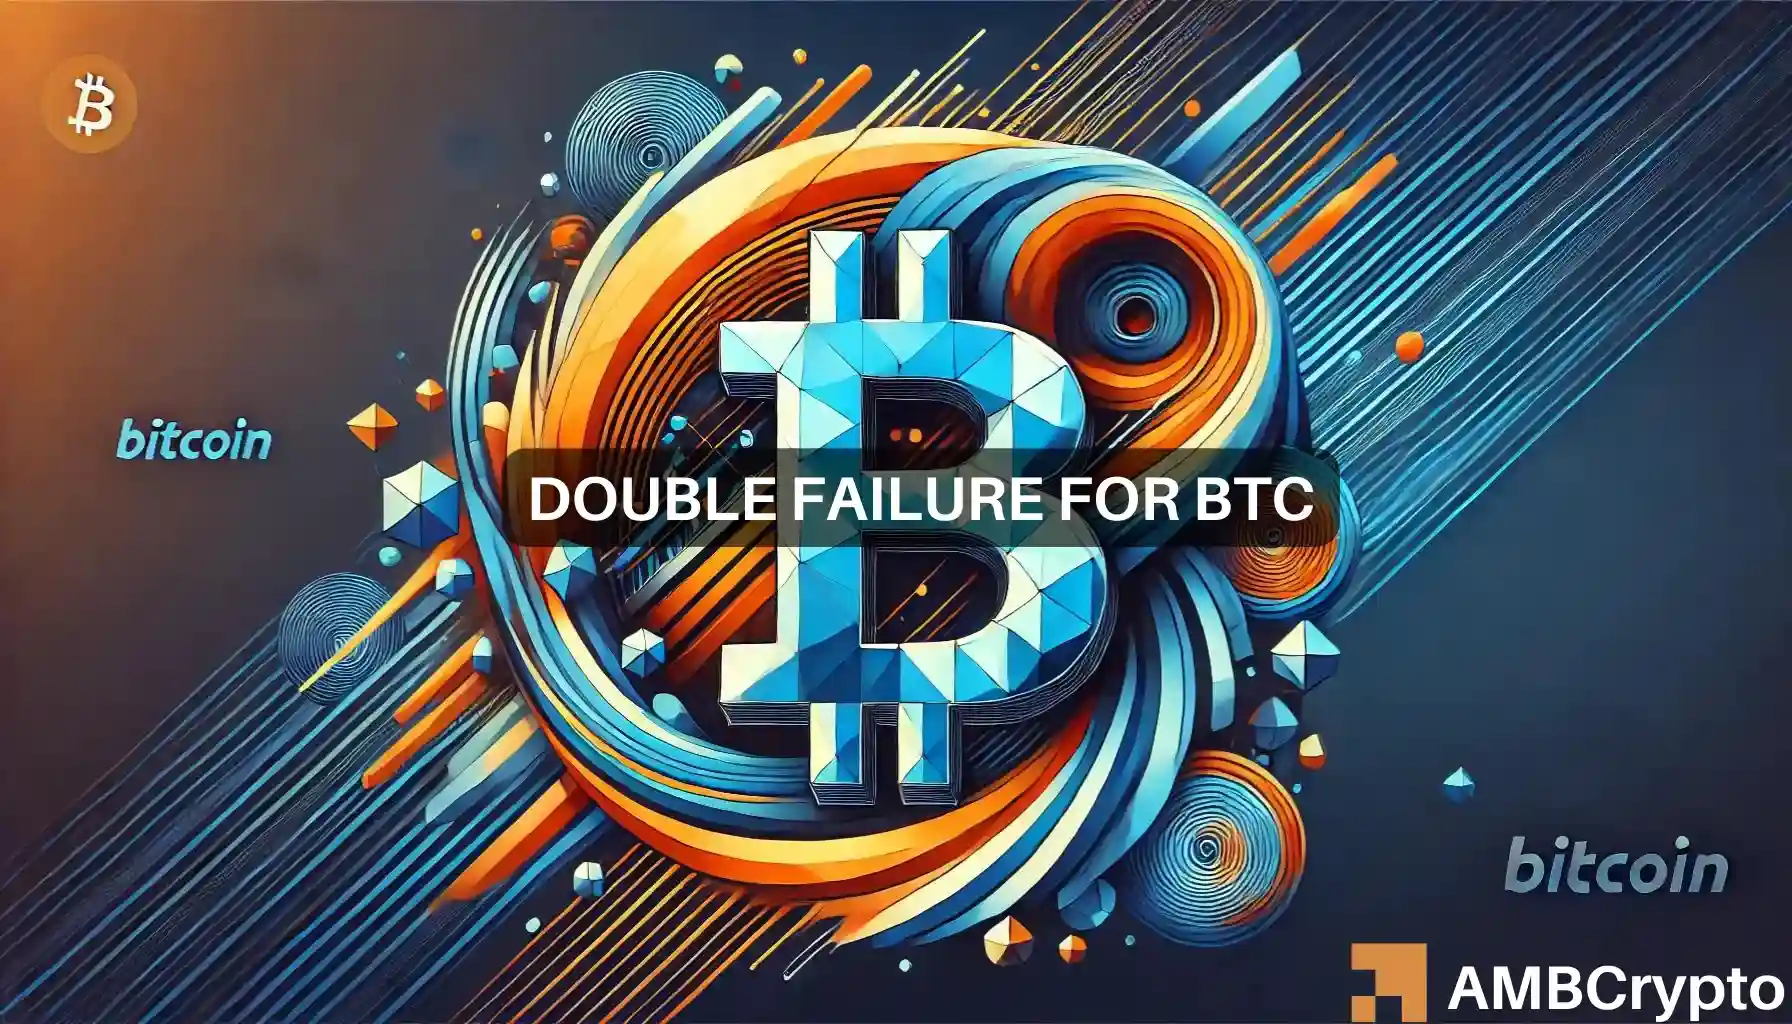 Bitcoin Struggles at $60k, DMA and leverage ratio were concerning